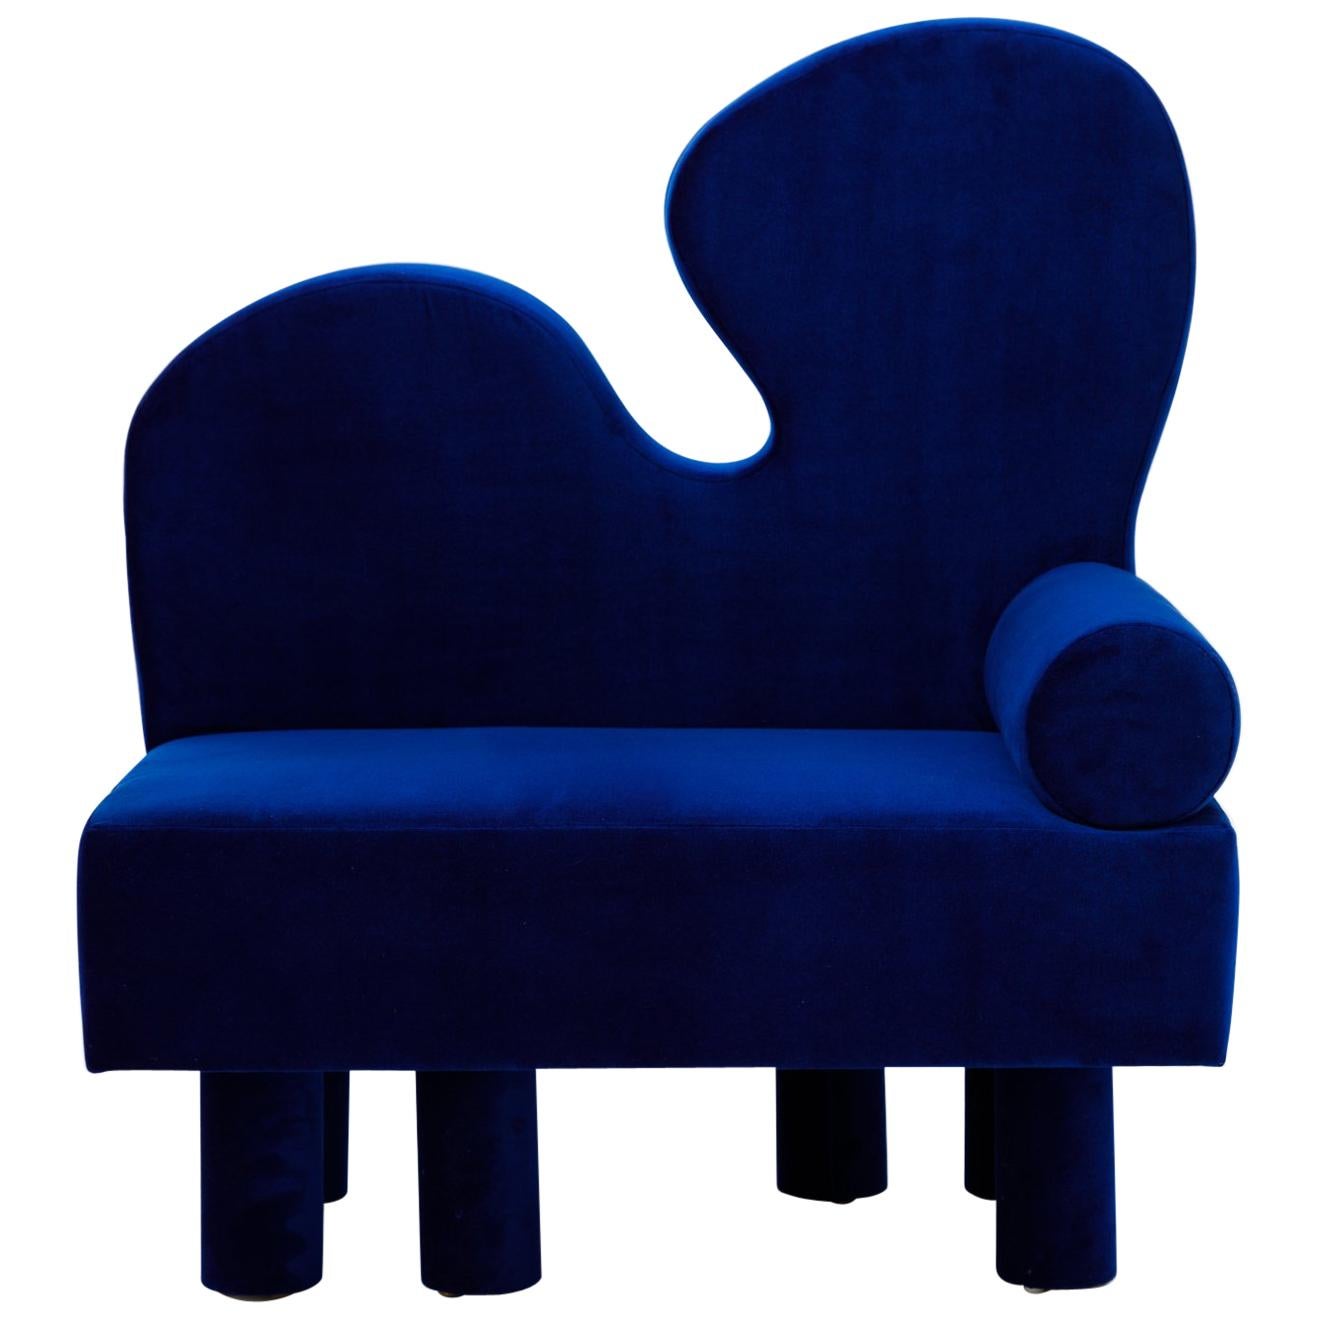 Bordon chair by Another Human, Blue Velvet Contemporary Lounge Chair